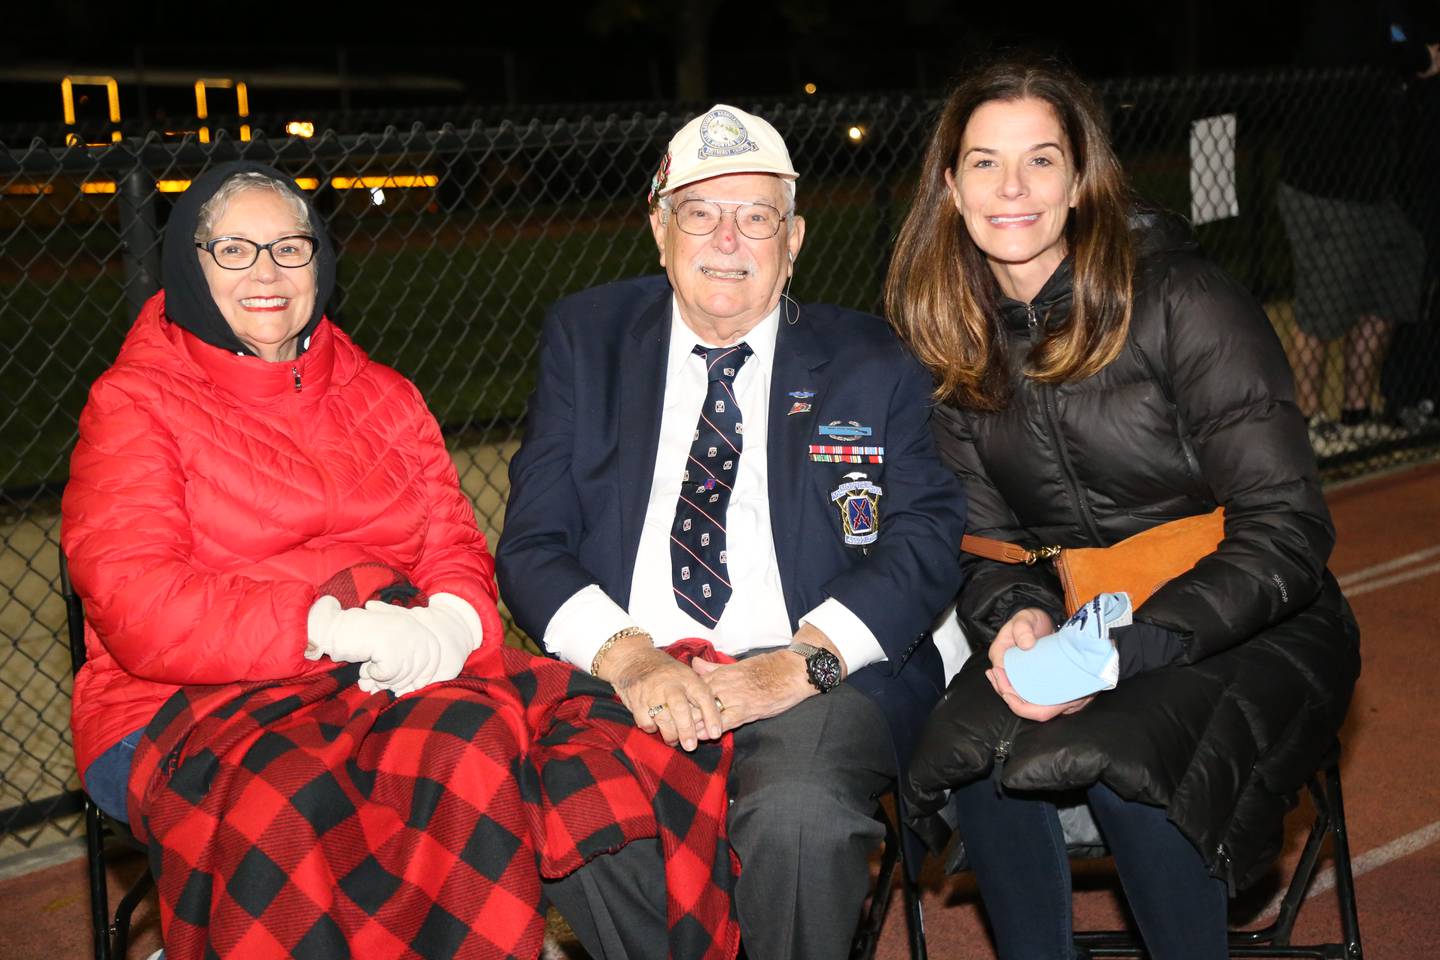 World War II veteran Jake Pollak, 92, was honored during halftime of a Downers Grove South High School football game. Pollack, a member of South's Class of 1944, served with the Army's 10th Mountain Division in Italy through the end of the war. Pollack is joined by his daughter Sharon Green, left, and Lisa Manecke, a neighbor and friend.